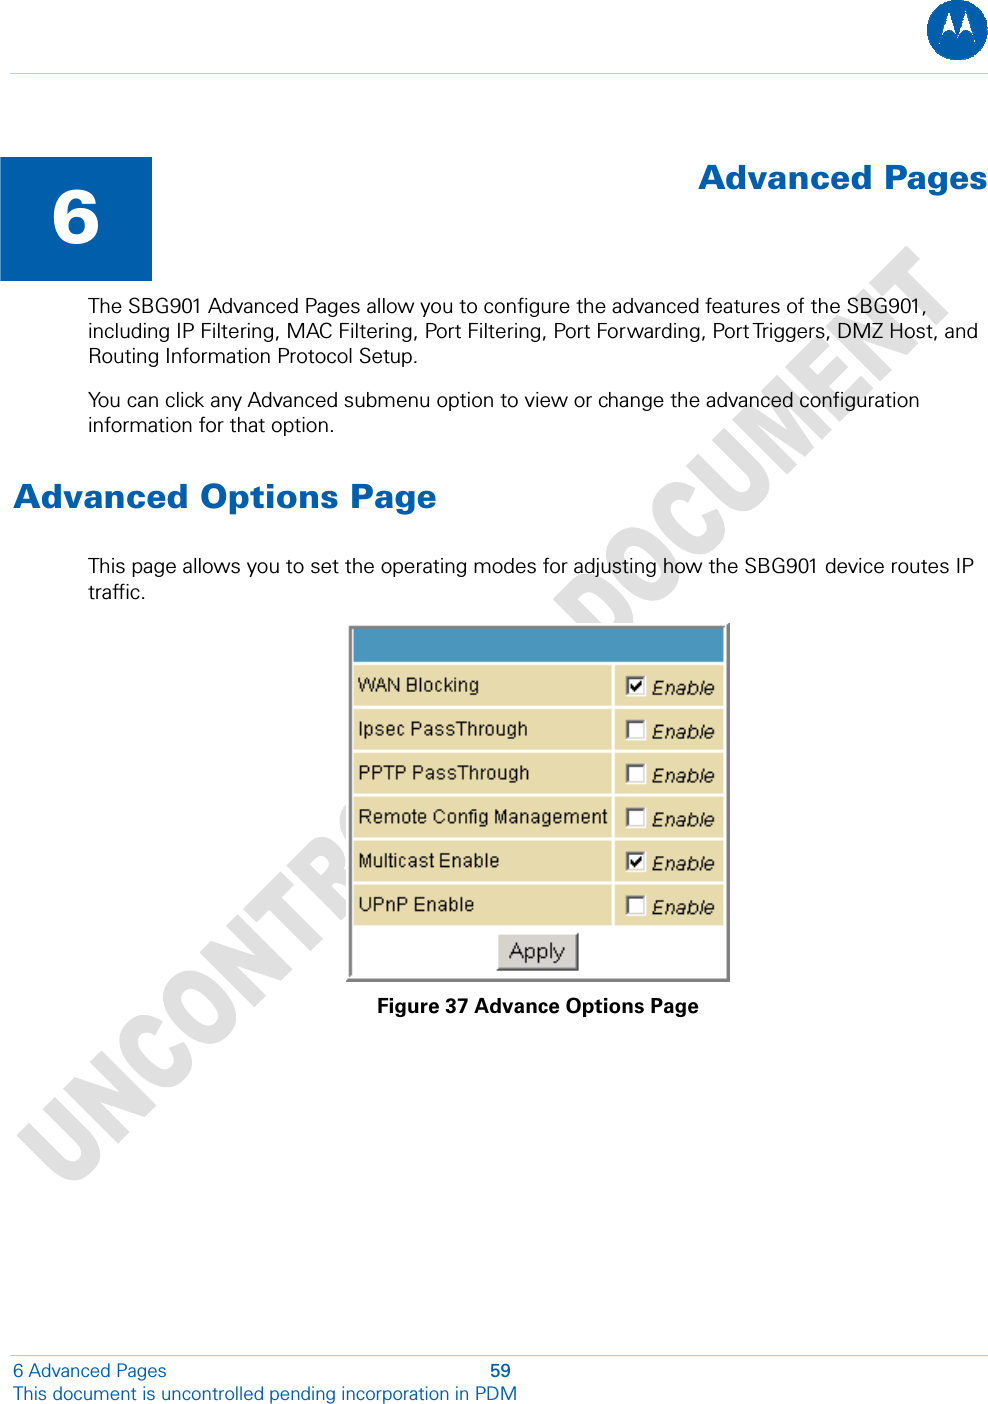   6  Advanced PagesThe SBG901 Advanced Pages allow you to configure the advanced features of the SBG901, including IP Filtering, MAC Filtering, Port Filtering, Port Forwarding, Port Triggers, DMZ Host, and Routing Information Protocol Setup. You can click any Advanced submenu option to view or change the advanced configuration information for that option. Advanced Options Page This page allows you to set the operating modes for adjusting how the SBG901 device routes IP traffic.  Figure 37 Advance Options Page 6 Advanced Pages  59 This document is uncontrolled pending incorporation in PDM  